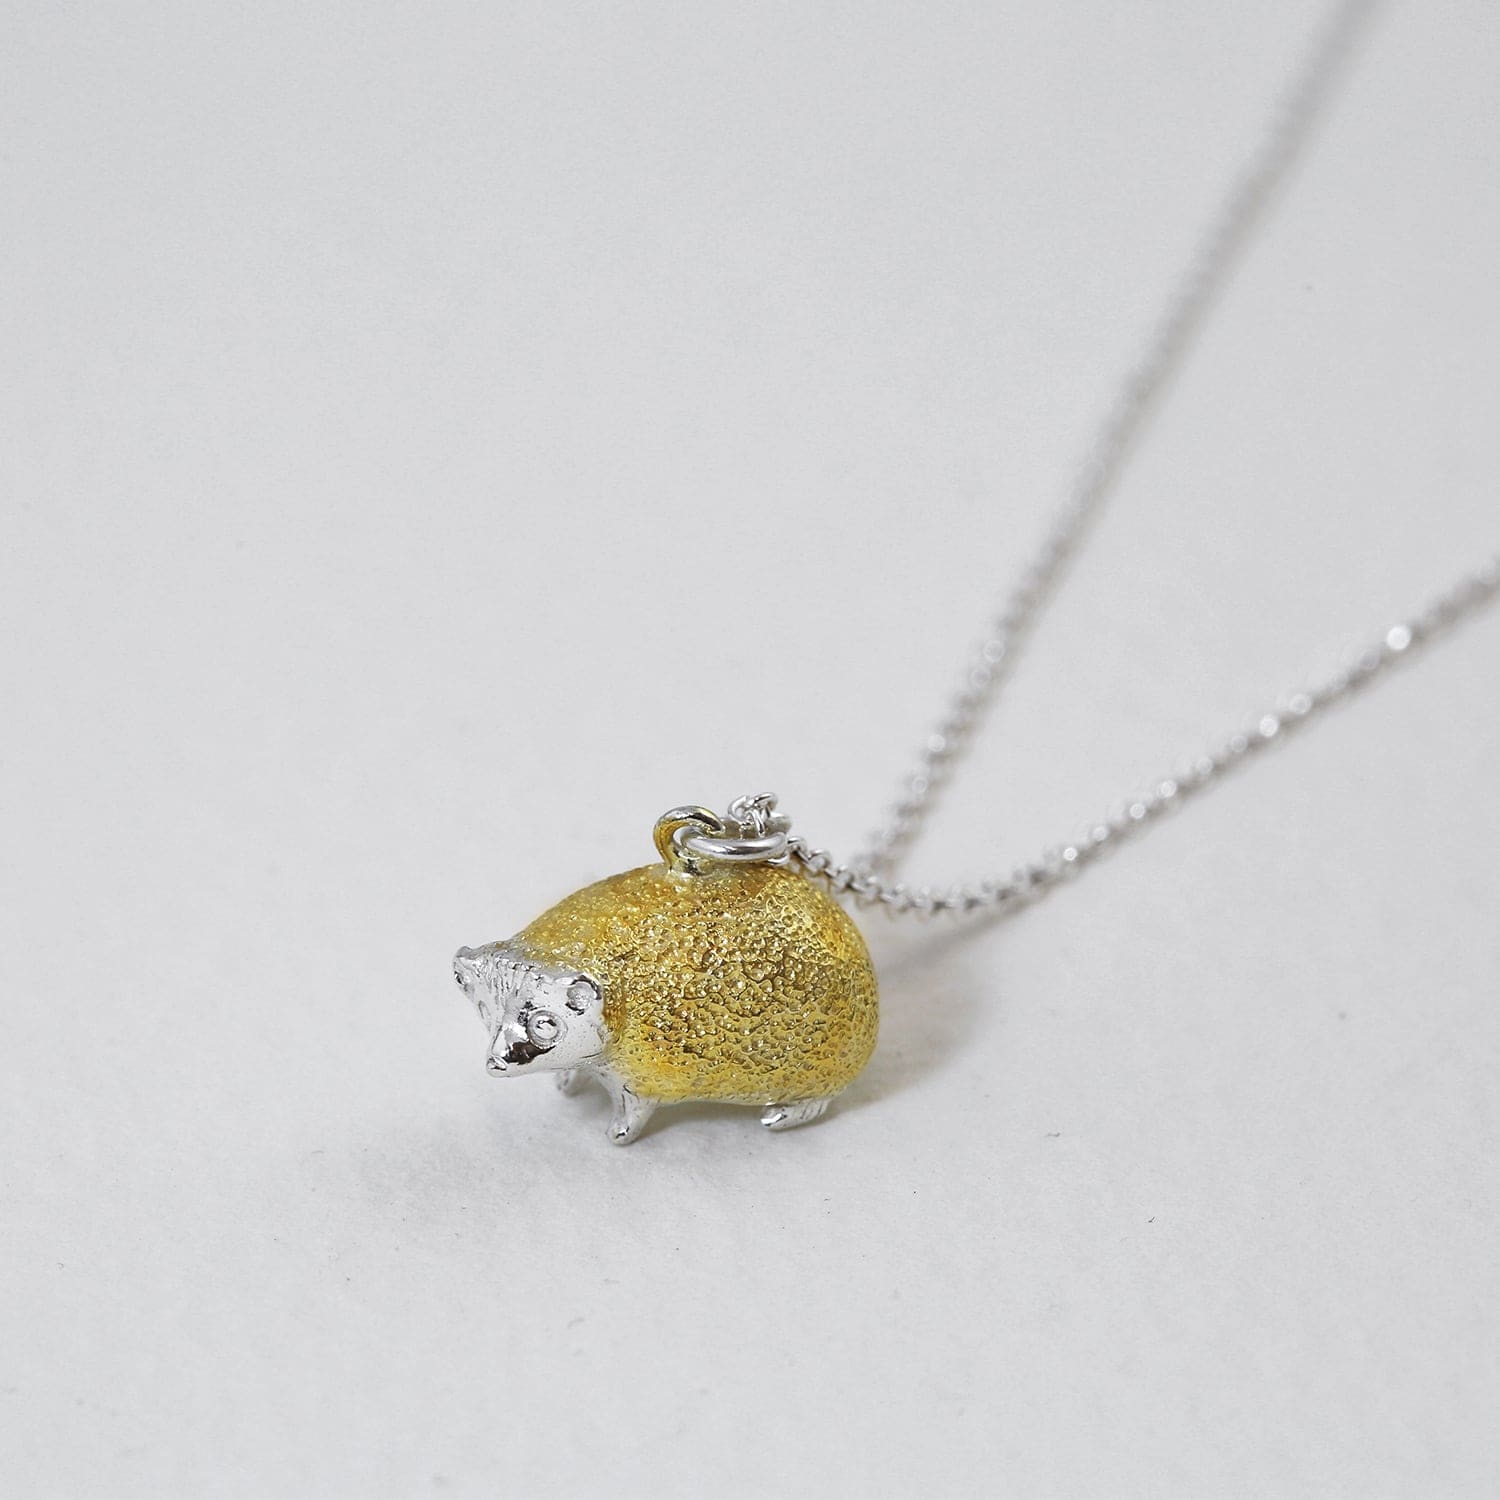 alex monroe x friends of the earth hedgehog necklace mixed metal